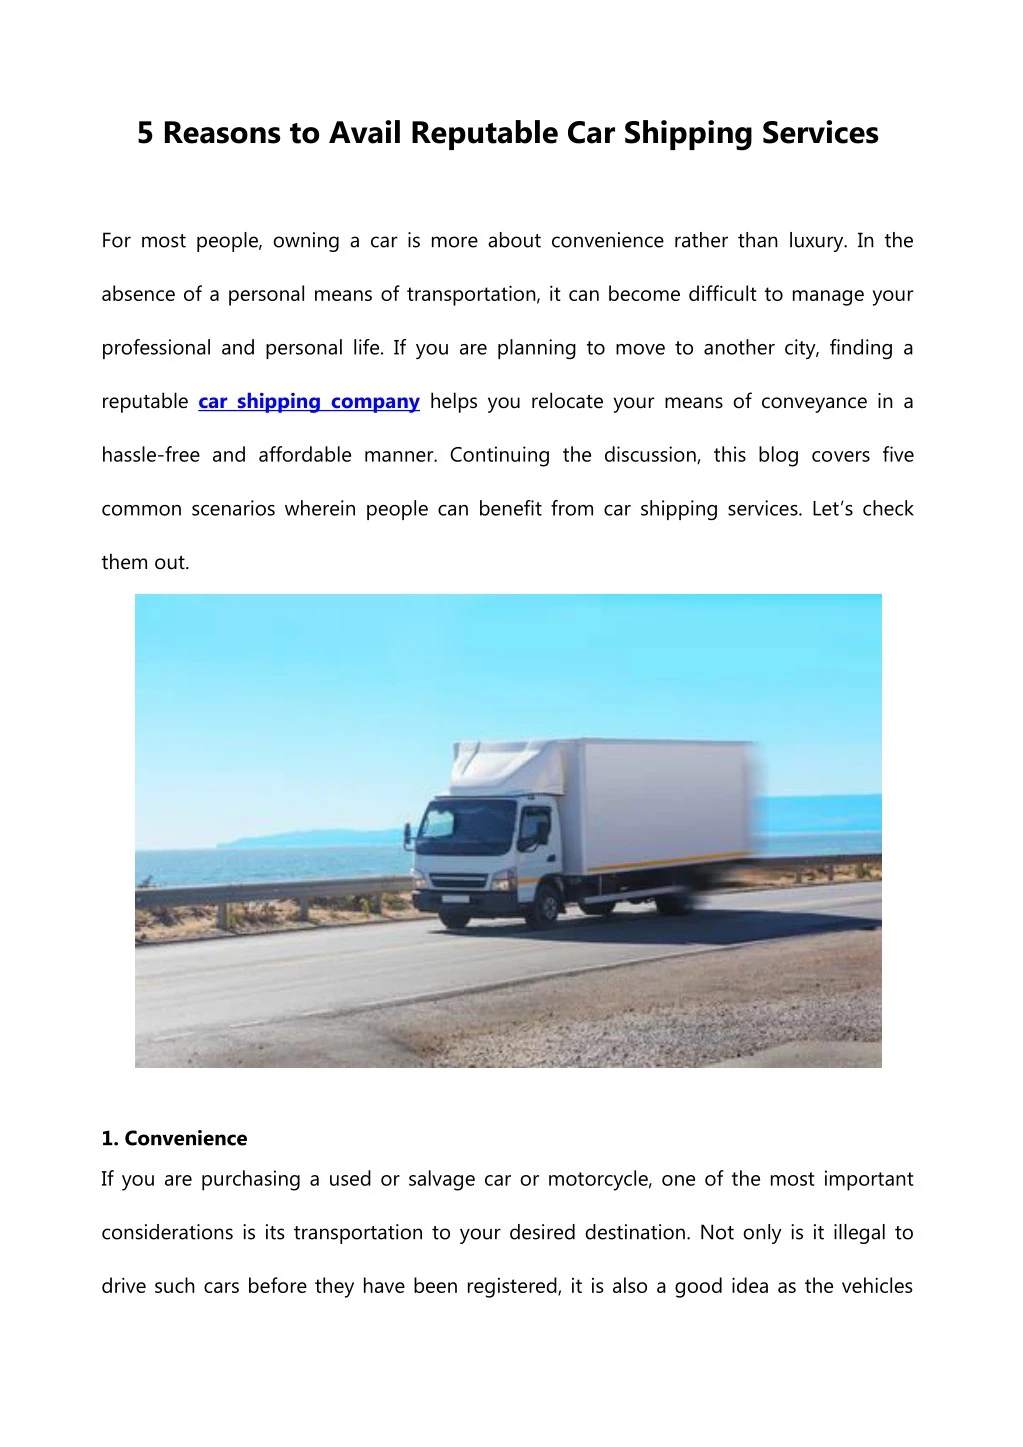 5 reasons to avail reputable car shipping services